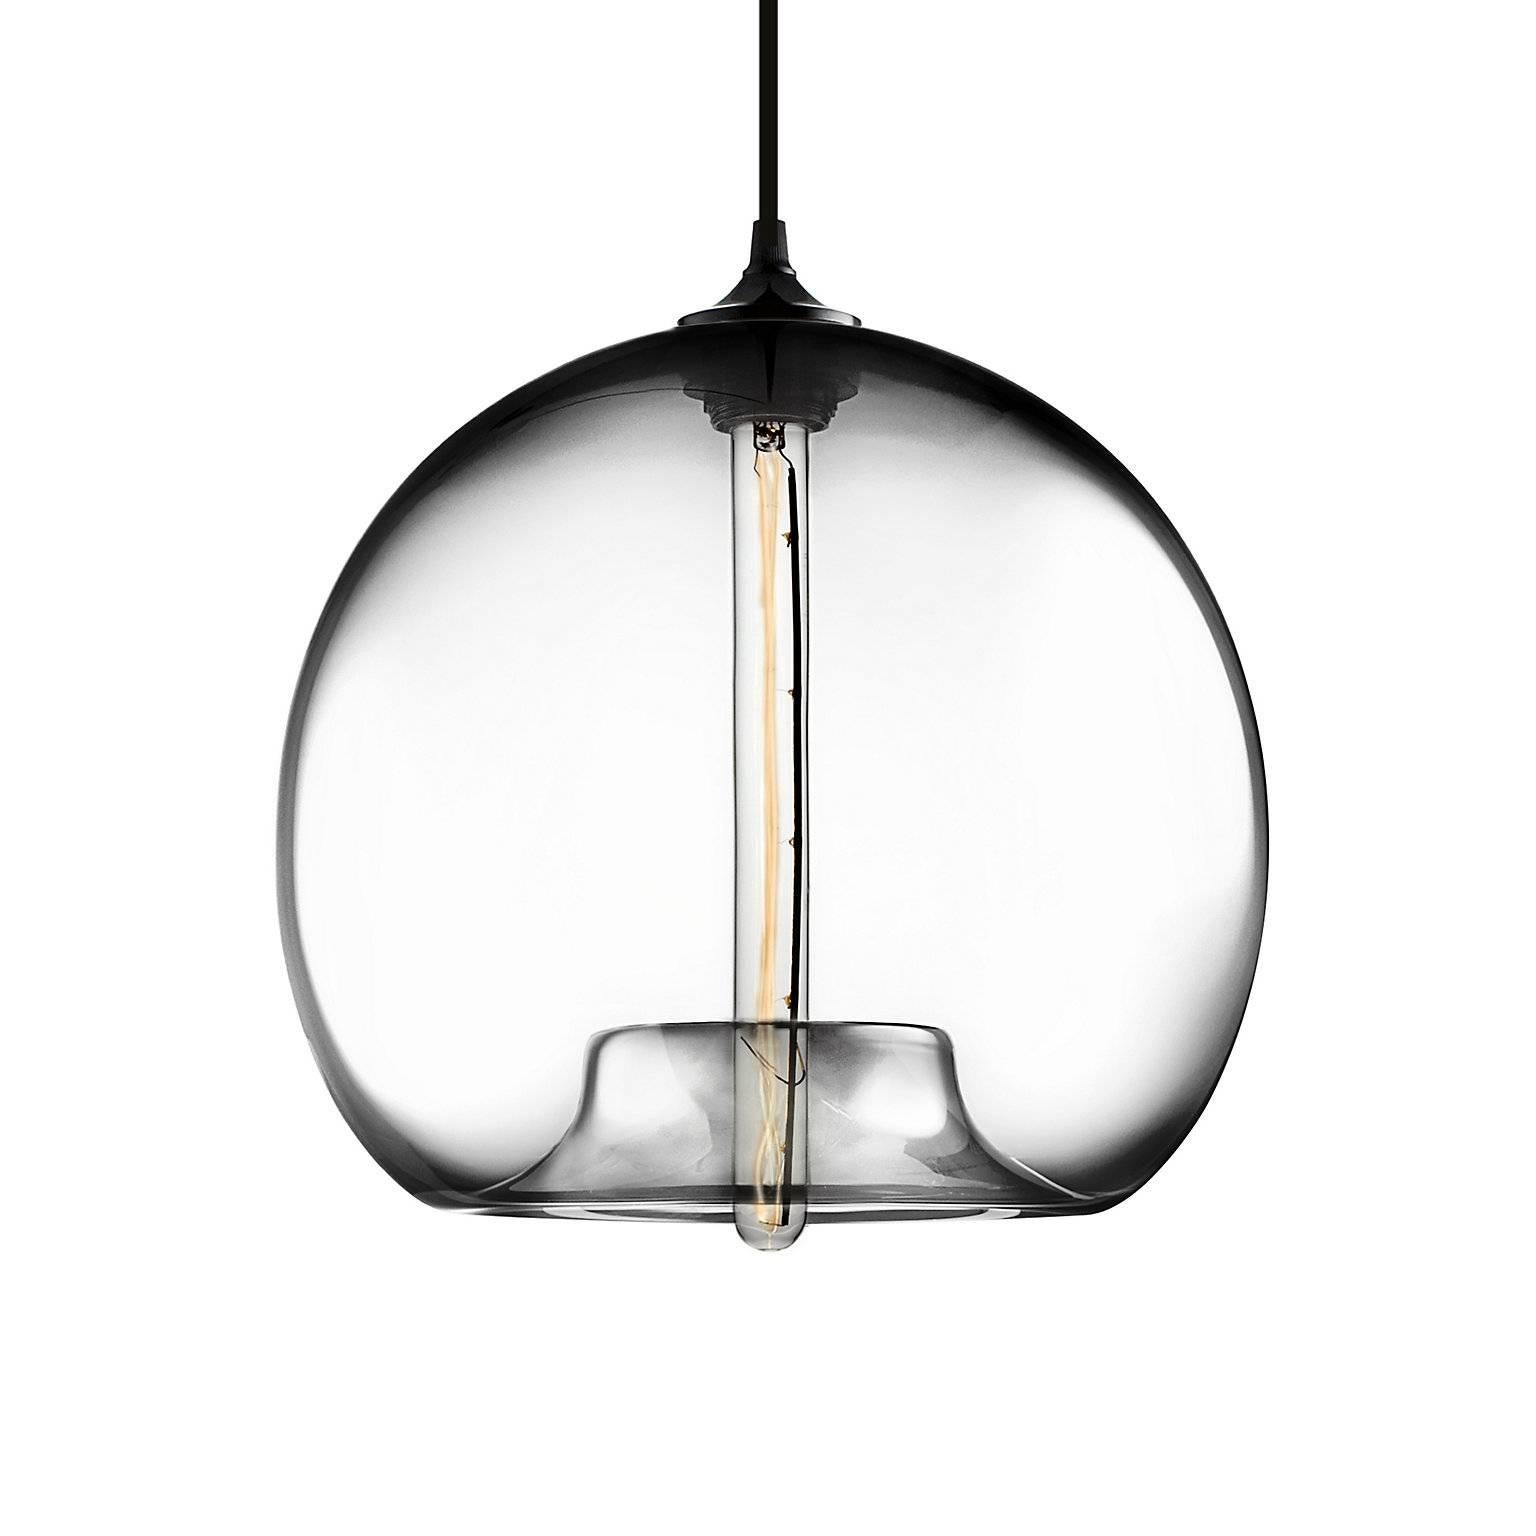 The first design that inspired Niche, the Stamen pendant boasts a voluptuous body that tucks into itself unexpectedly. Every single glass pendant light that comes from Niche is handblown by real human beings in a state-of-the-art studio located in